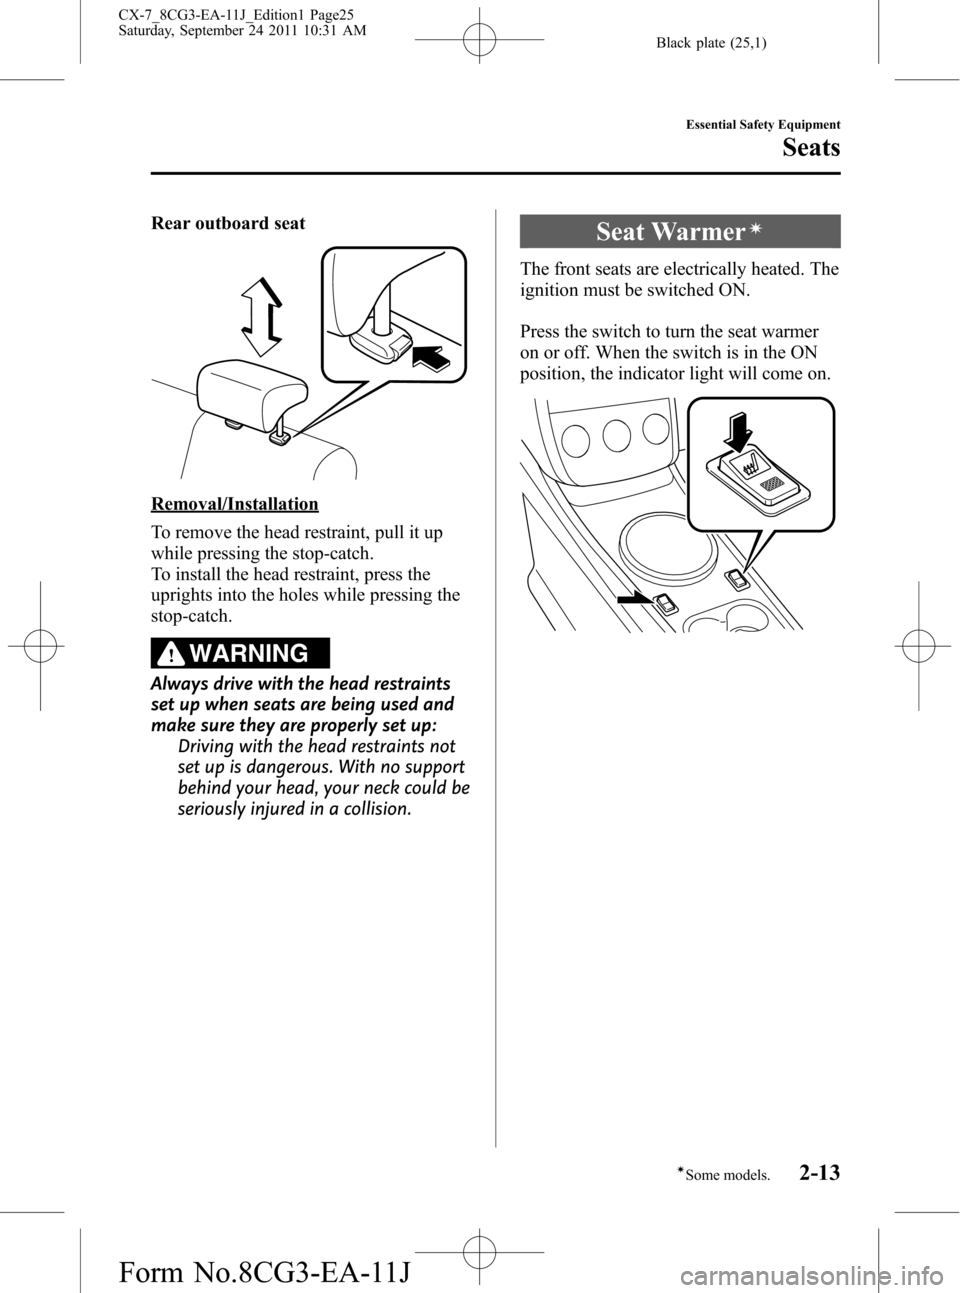 MAZDA MODEL CX-7 2012  Owners Manual (in English) Black plate (25,1)
Rear outboard seat
Removal/Installation
To remove the head restraint, pull it up
while pressing the stop-catch.
To install the head restraint, press the
uprights into the holes whil